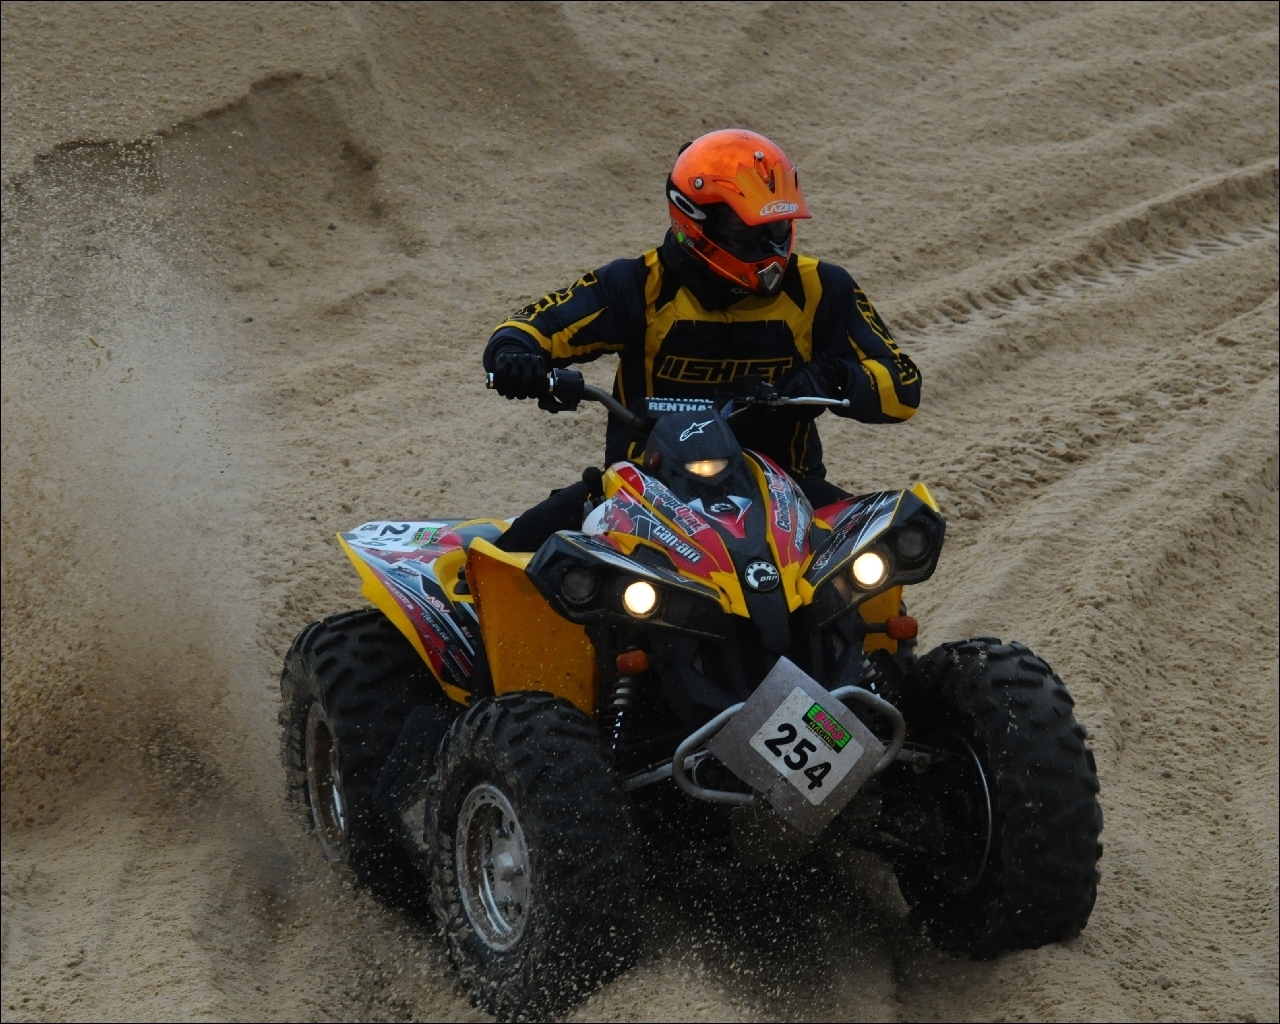 ATV free Wallpapers 13 photos for your desktop, download pictures